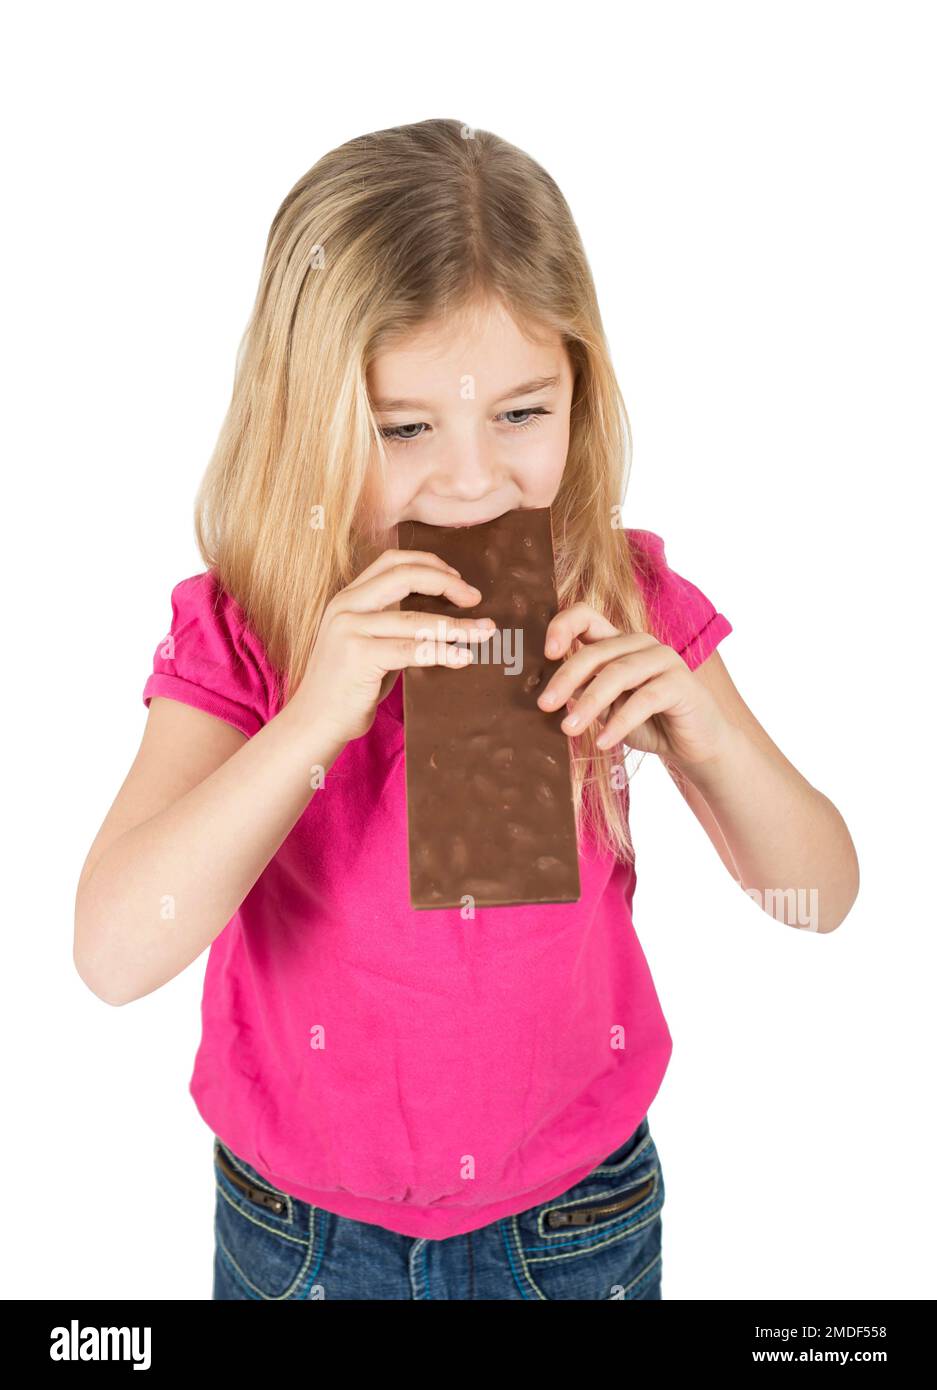 little girl eating chocolate isolated on white Stock Photo